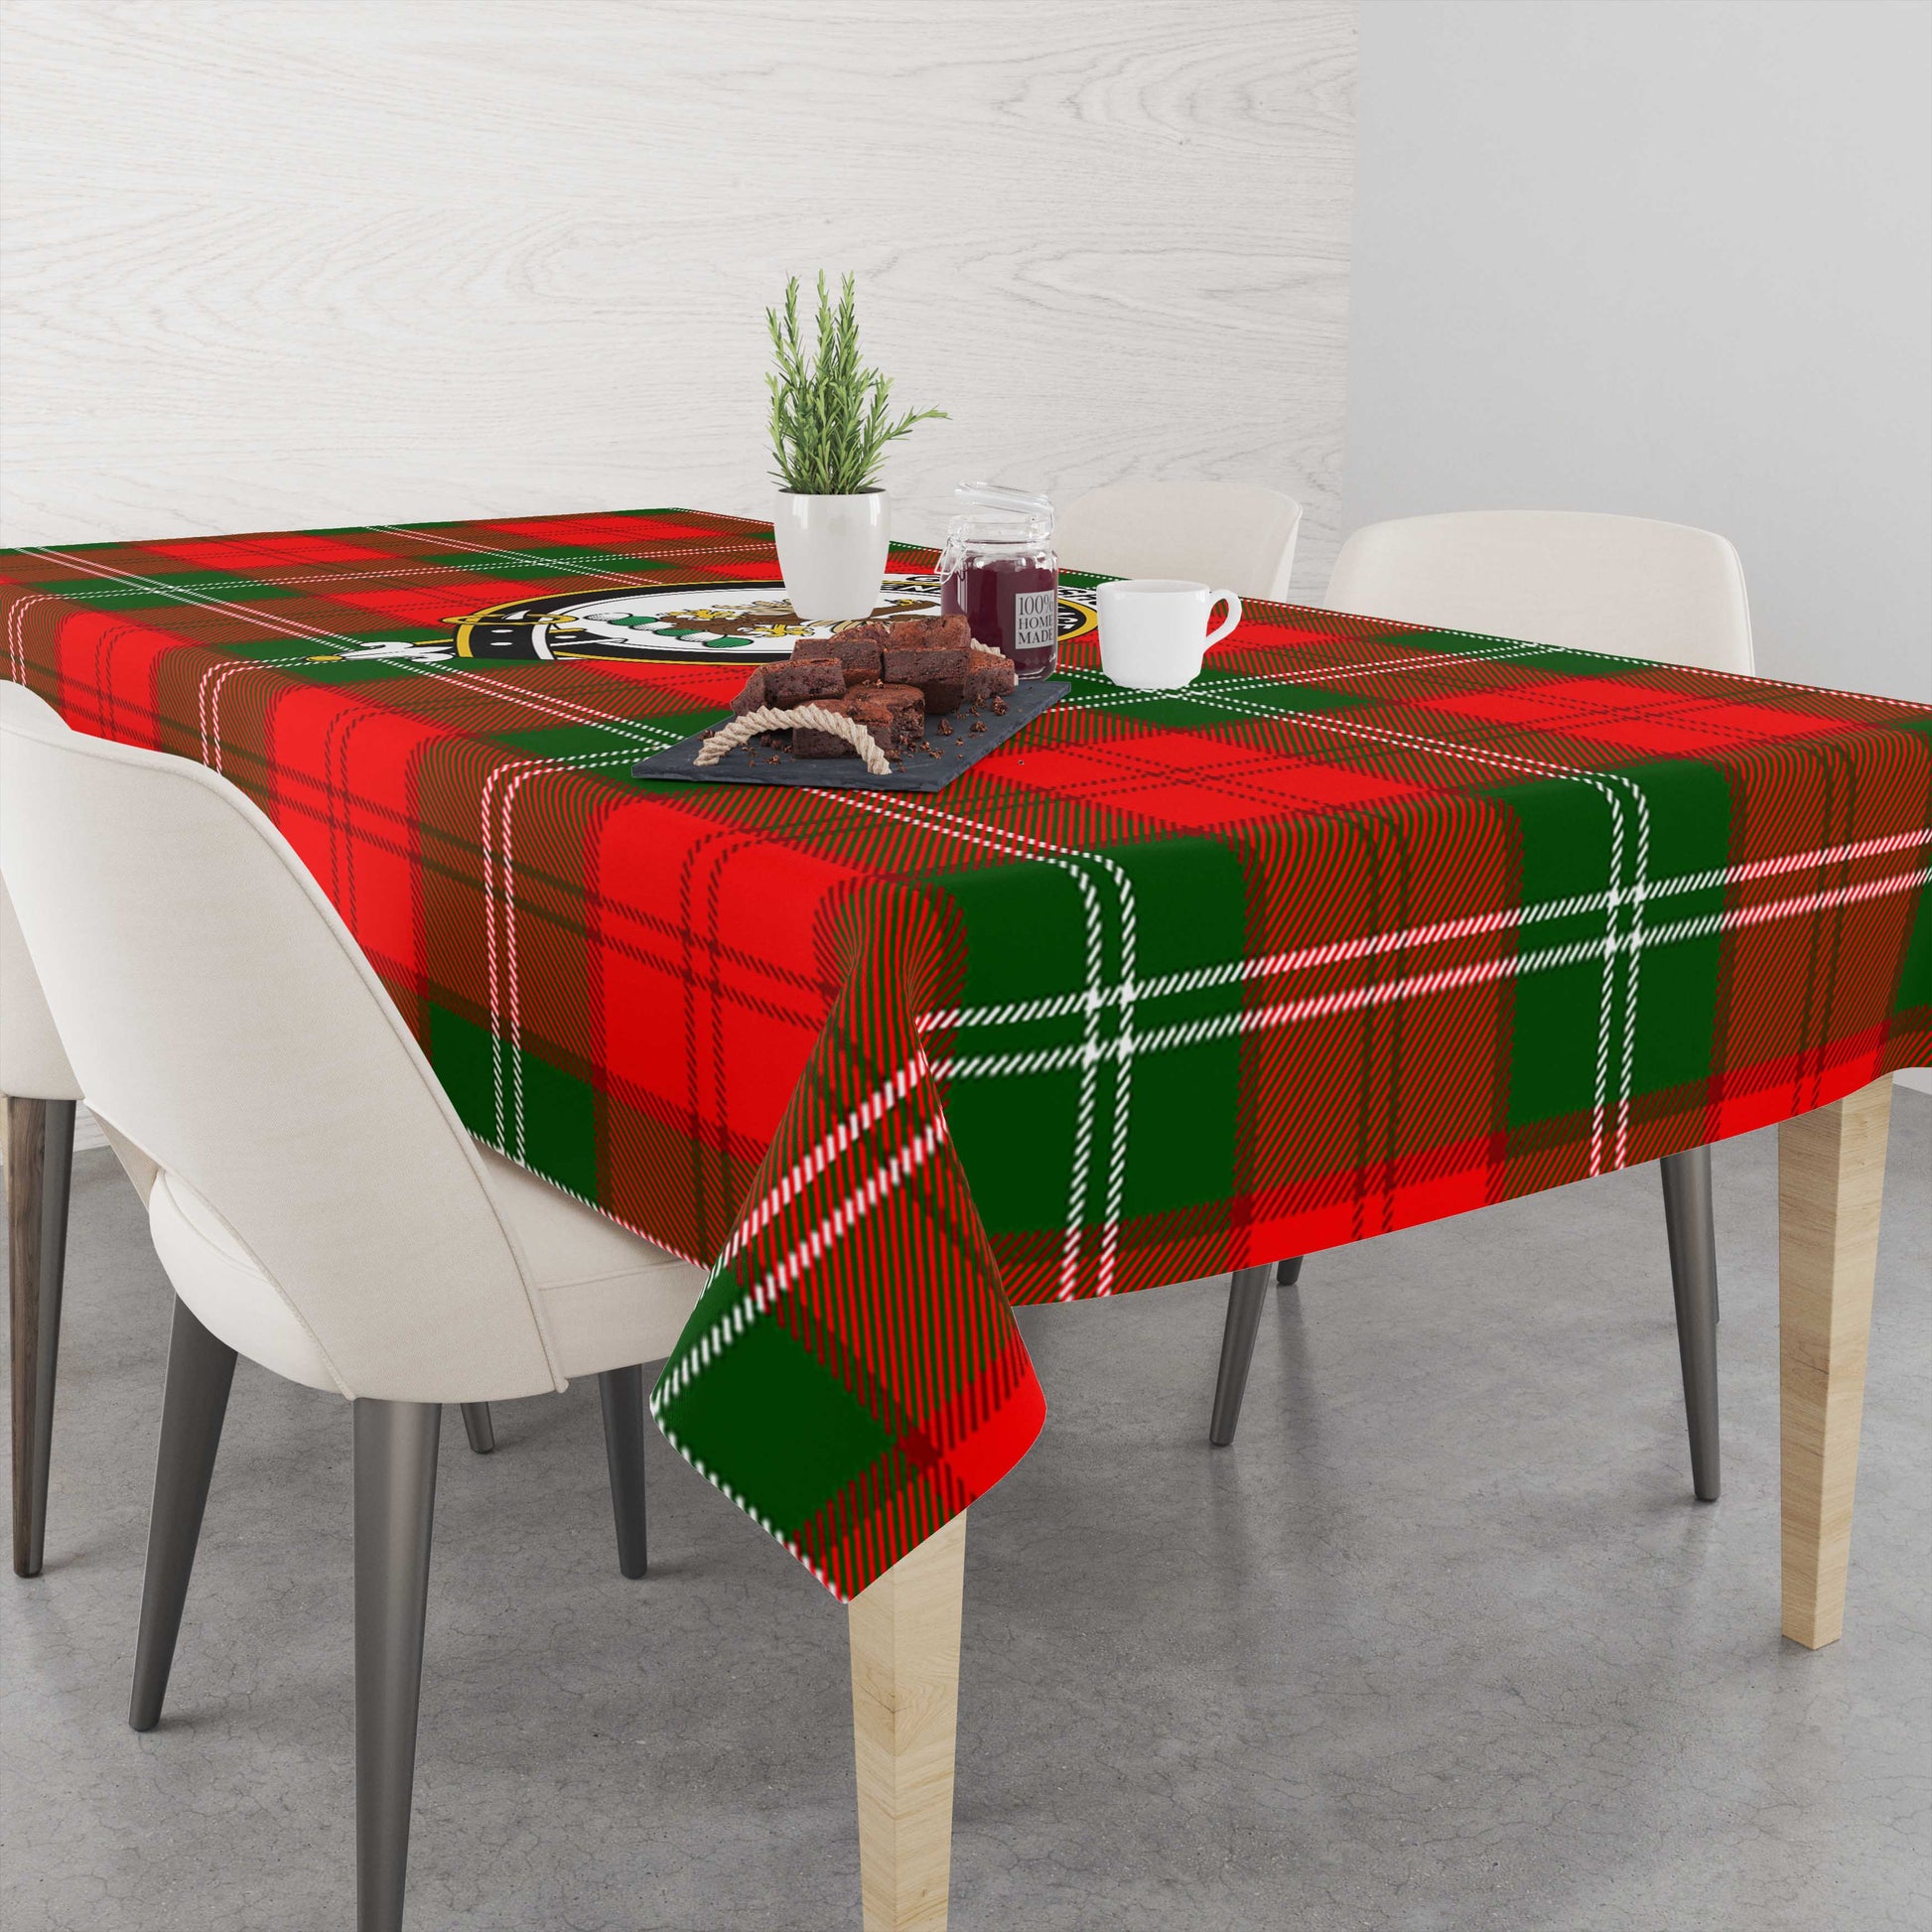 gartshore-tatan-tablecloth-with-family-crest